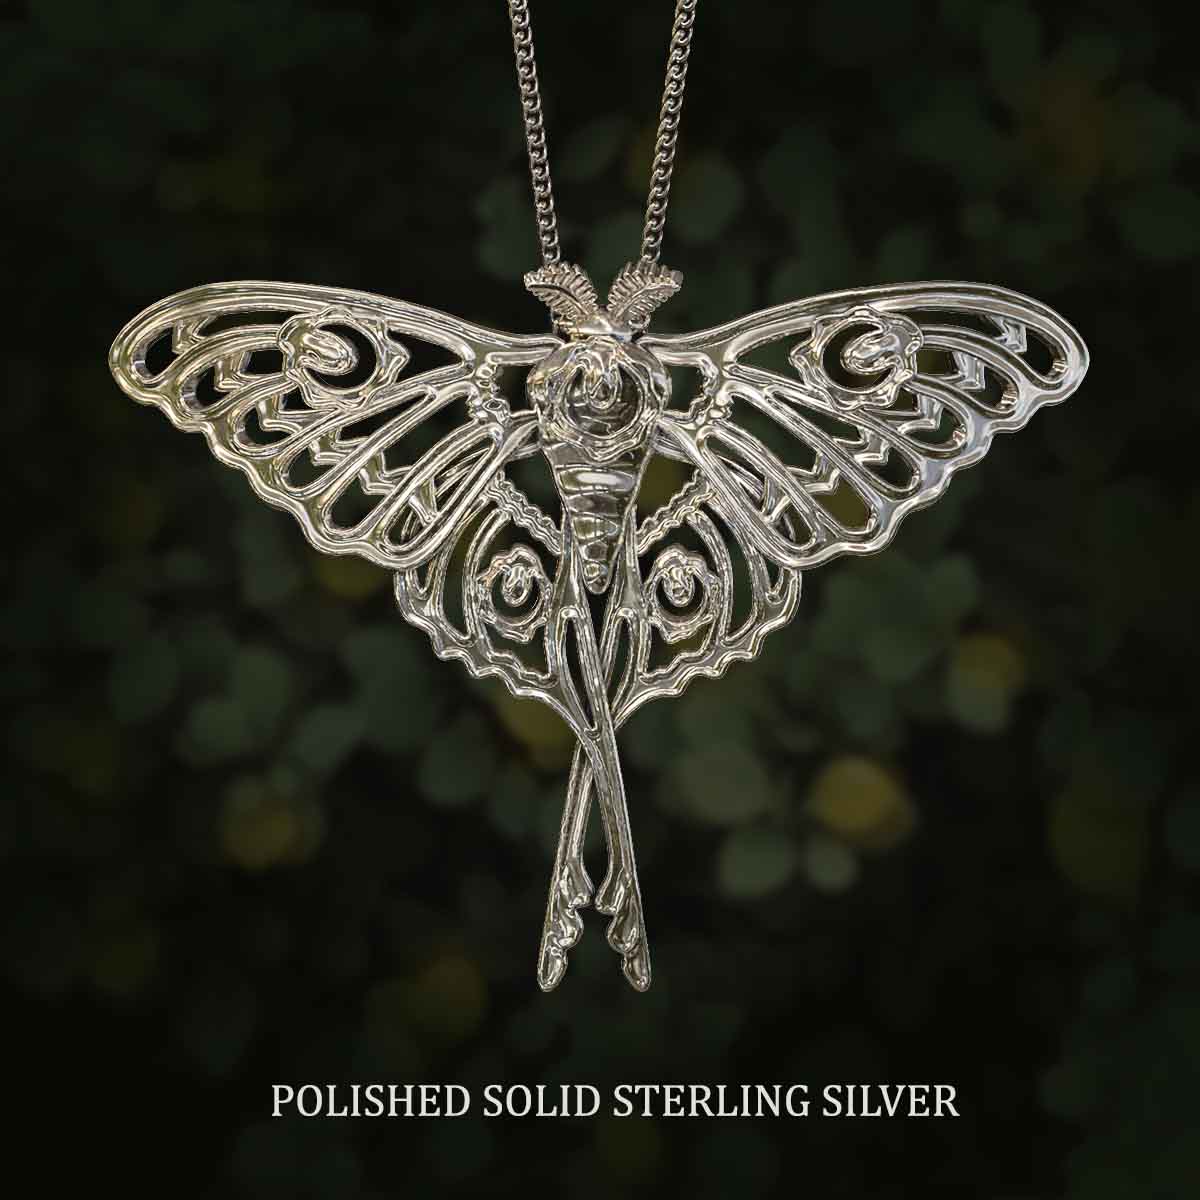 Polished-Solid-Sterling-Silver-Comet-Moth-Pendant-Jewelry-For-Necklace